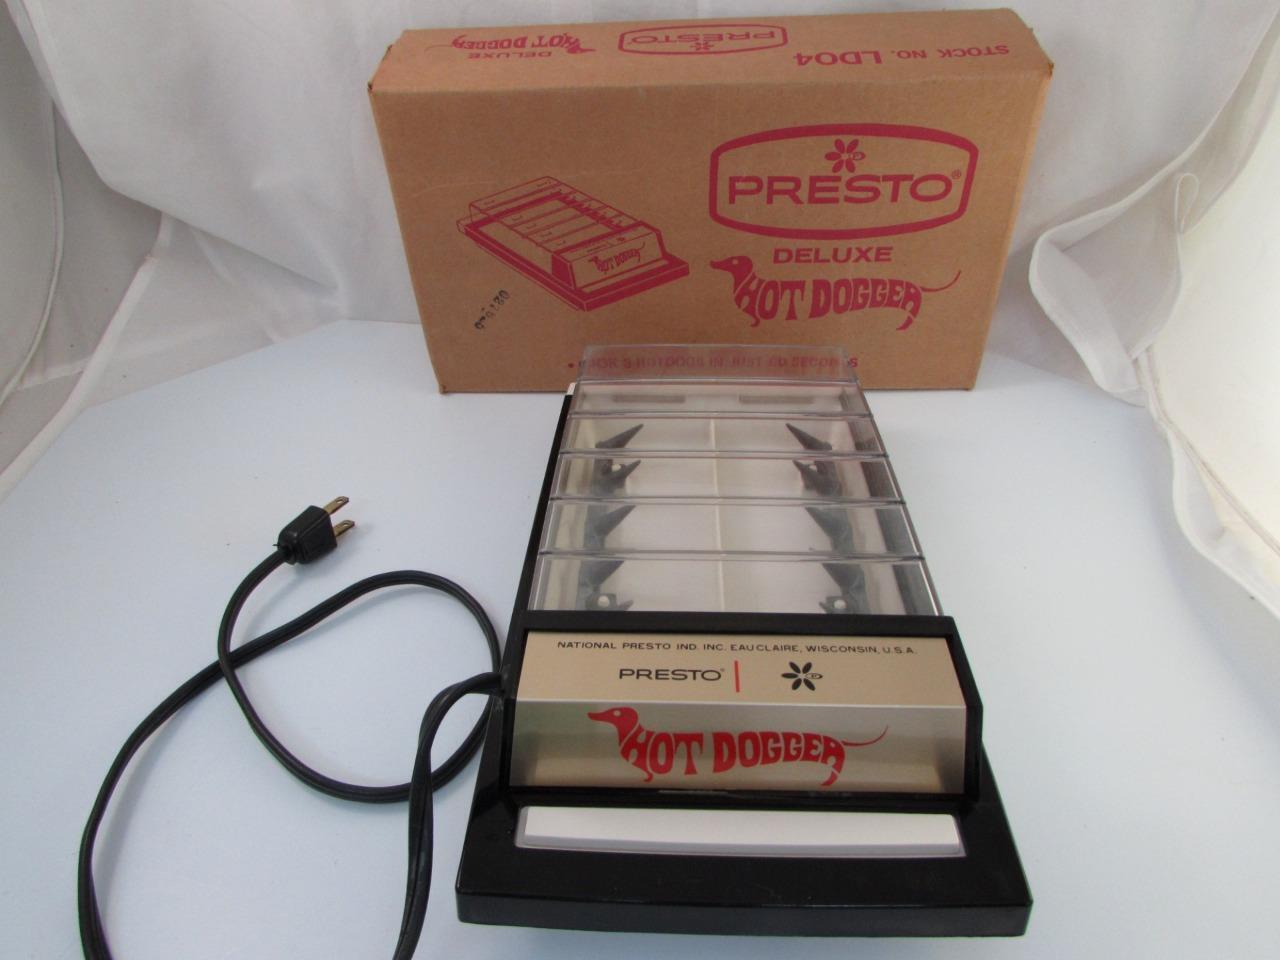 Vintage - Presto Hot Dogger Cooker - 100% Working. With Box 6 DOGS IN 60 SECONDS